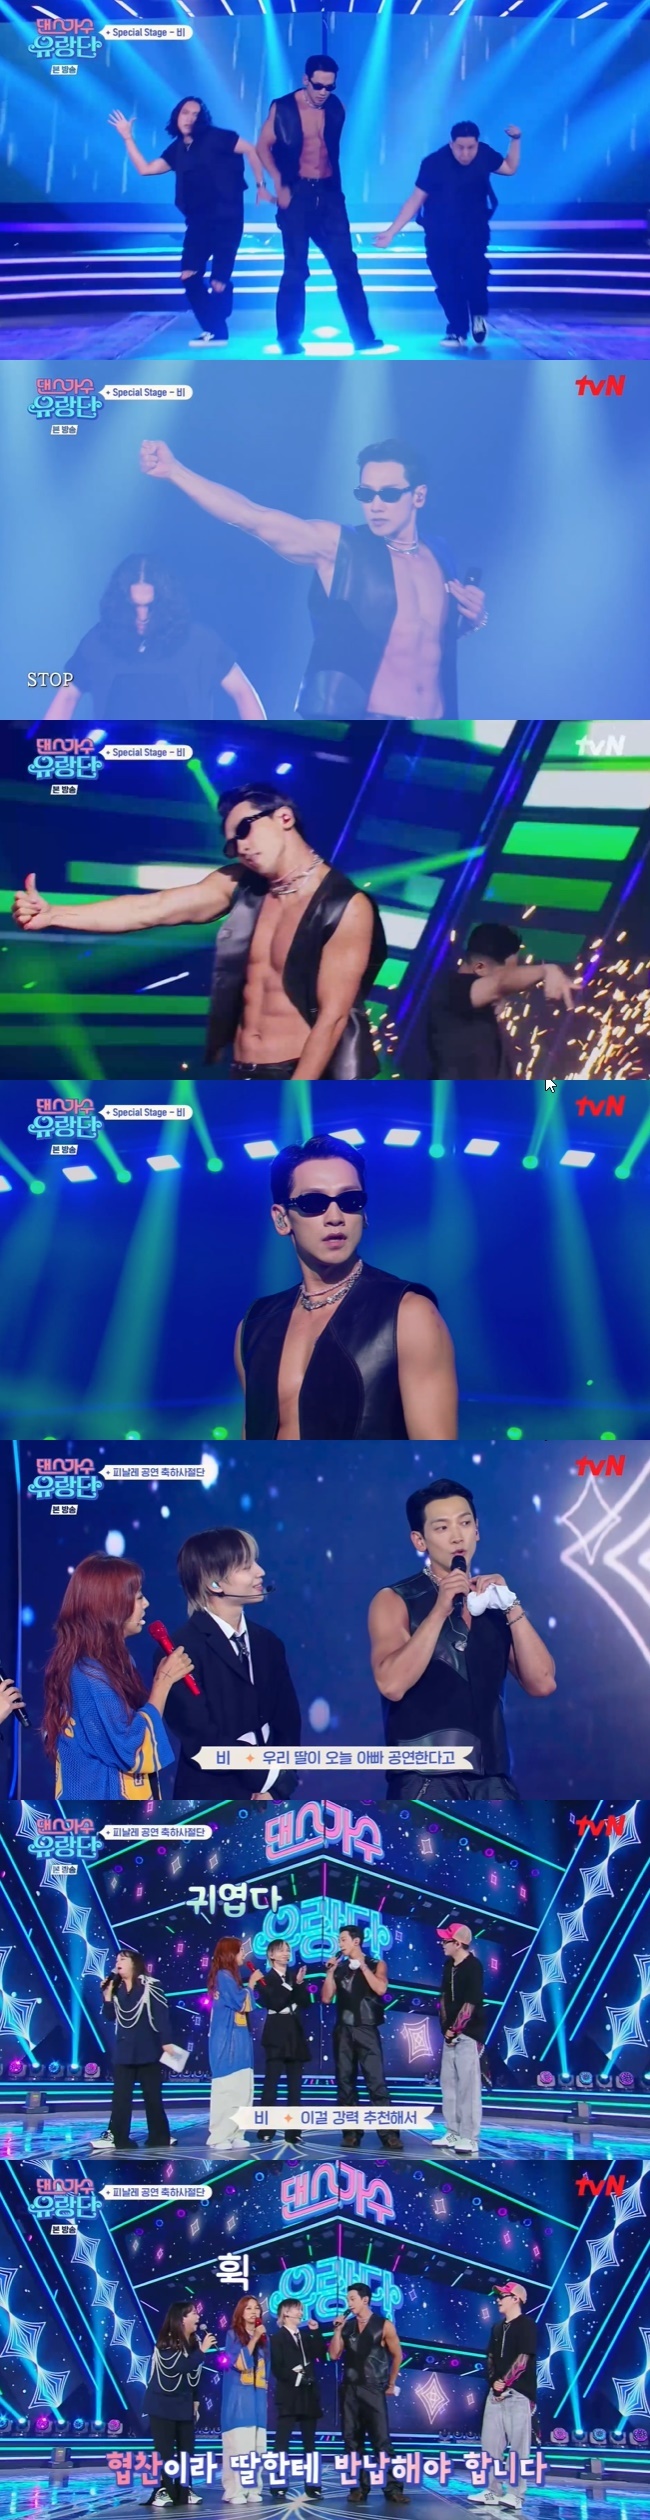 The rain enthralled the audience with its strong muscles and powerful performance.TVN  ⁇  a dance troupe  ⁇ , which was broadcasted on August 10, visited the Seoul concert for a rain celebration performance.The rain followed Zico s hip stage. The audience greeted the rain with a heated shout. Rain unbuttoned his vest, unveiled his solid abs, and started the  ⁇ It ⁇ s Raining ⁇  Stage.Lee Tae-min, who was preparing the stage in the next order, also admired that it was cool, and Lee Hyori, who had previously cracked down on the exposure of rain, shouted that he had come out.Rain was impressed with his intense choreography and stable live performance.When the rain followed the way to avoid the sun, Kim Wan-sun admired that it was crazy, and Uhm Jung-hwa, who was under makeup, turned toward the chair and watched it.Finally, the rain was filled with a powerful performance and the atmosphere of the scene warmed up.